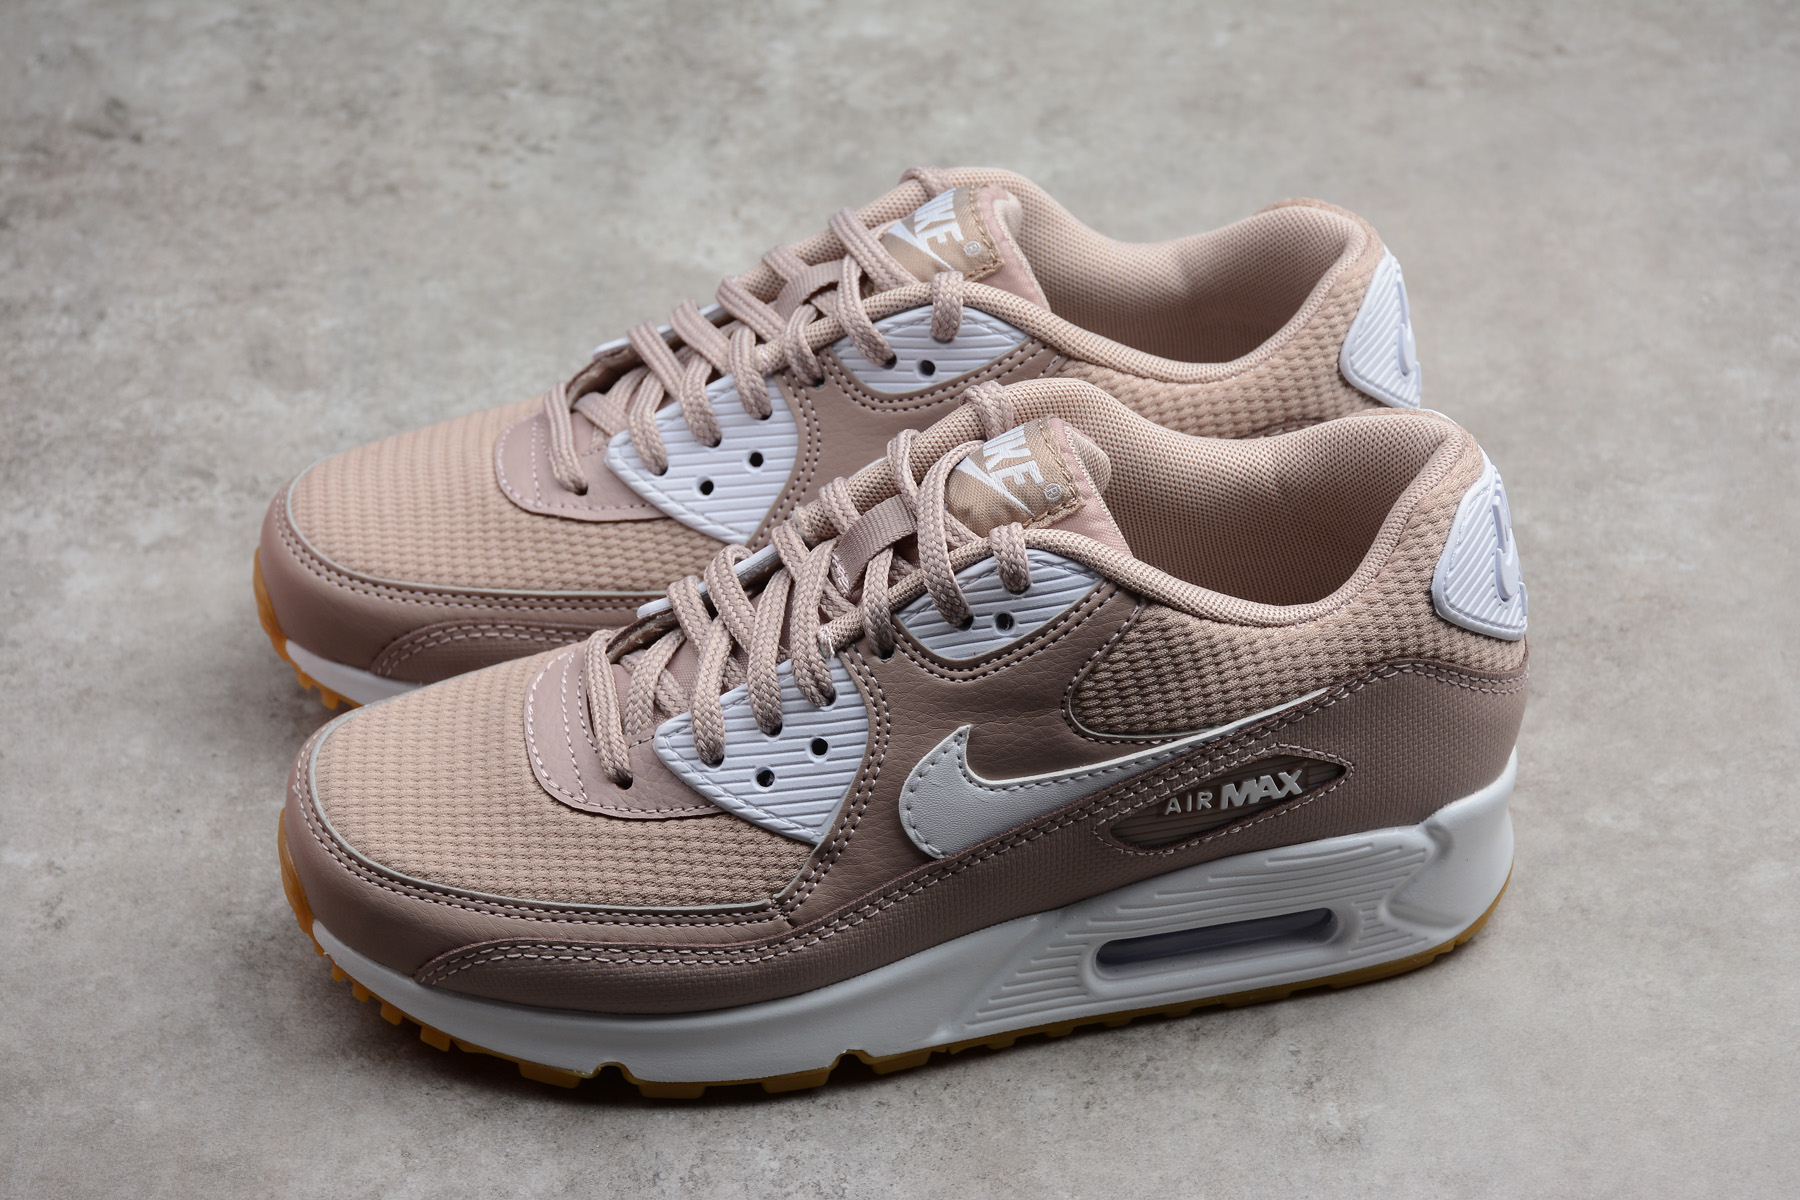 Women's Nike Air Max 90 Essential Diffused Taupe/WhiteGum 325213210